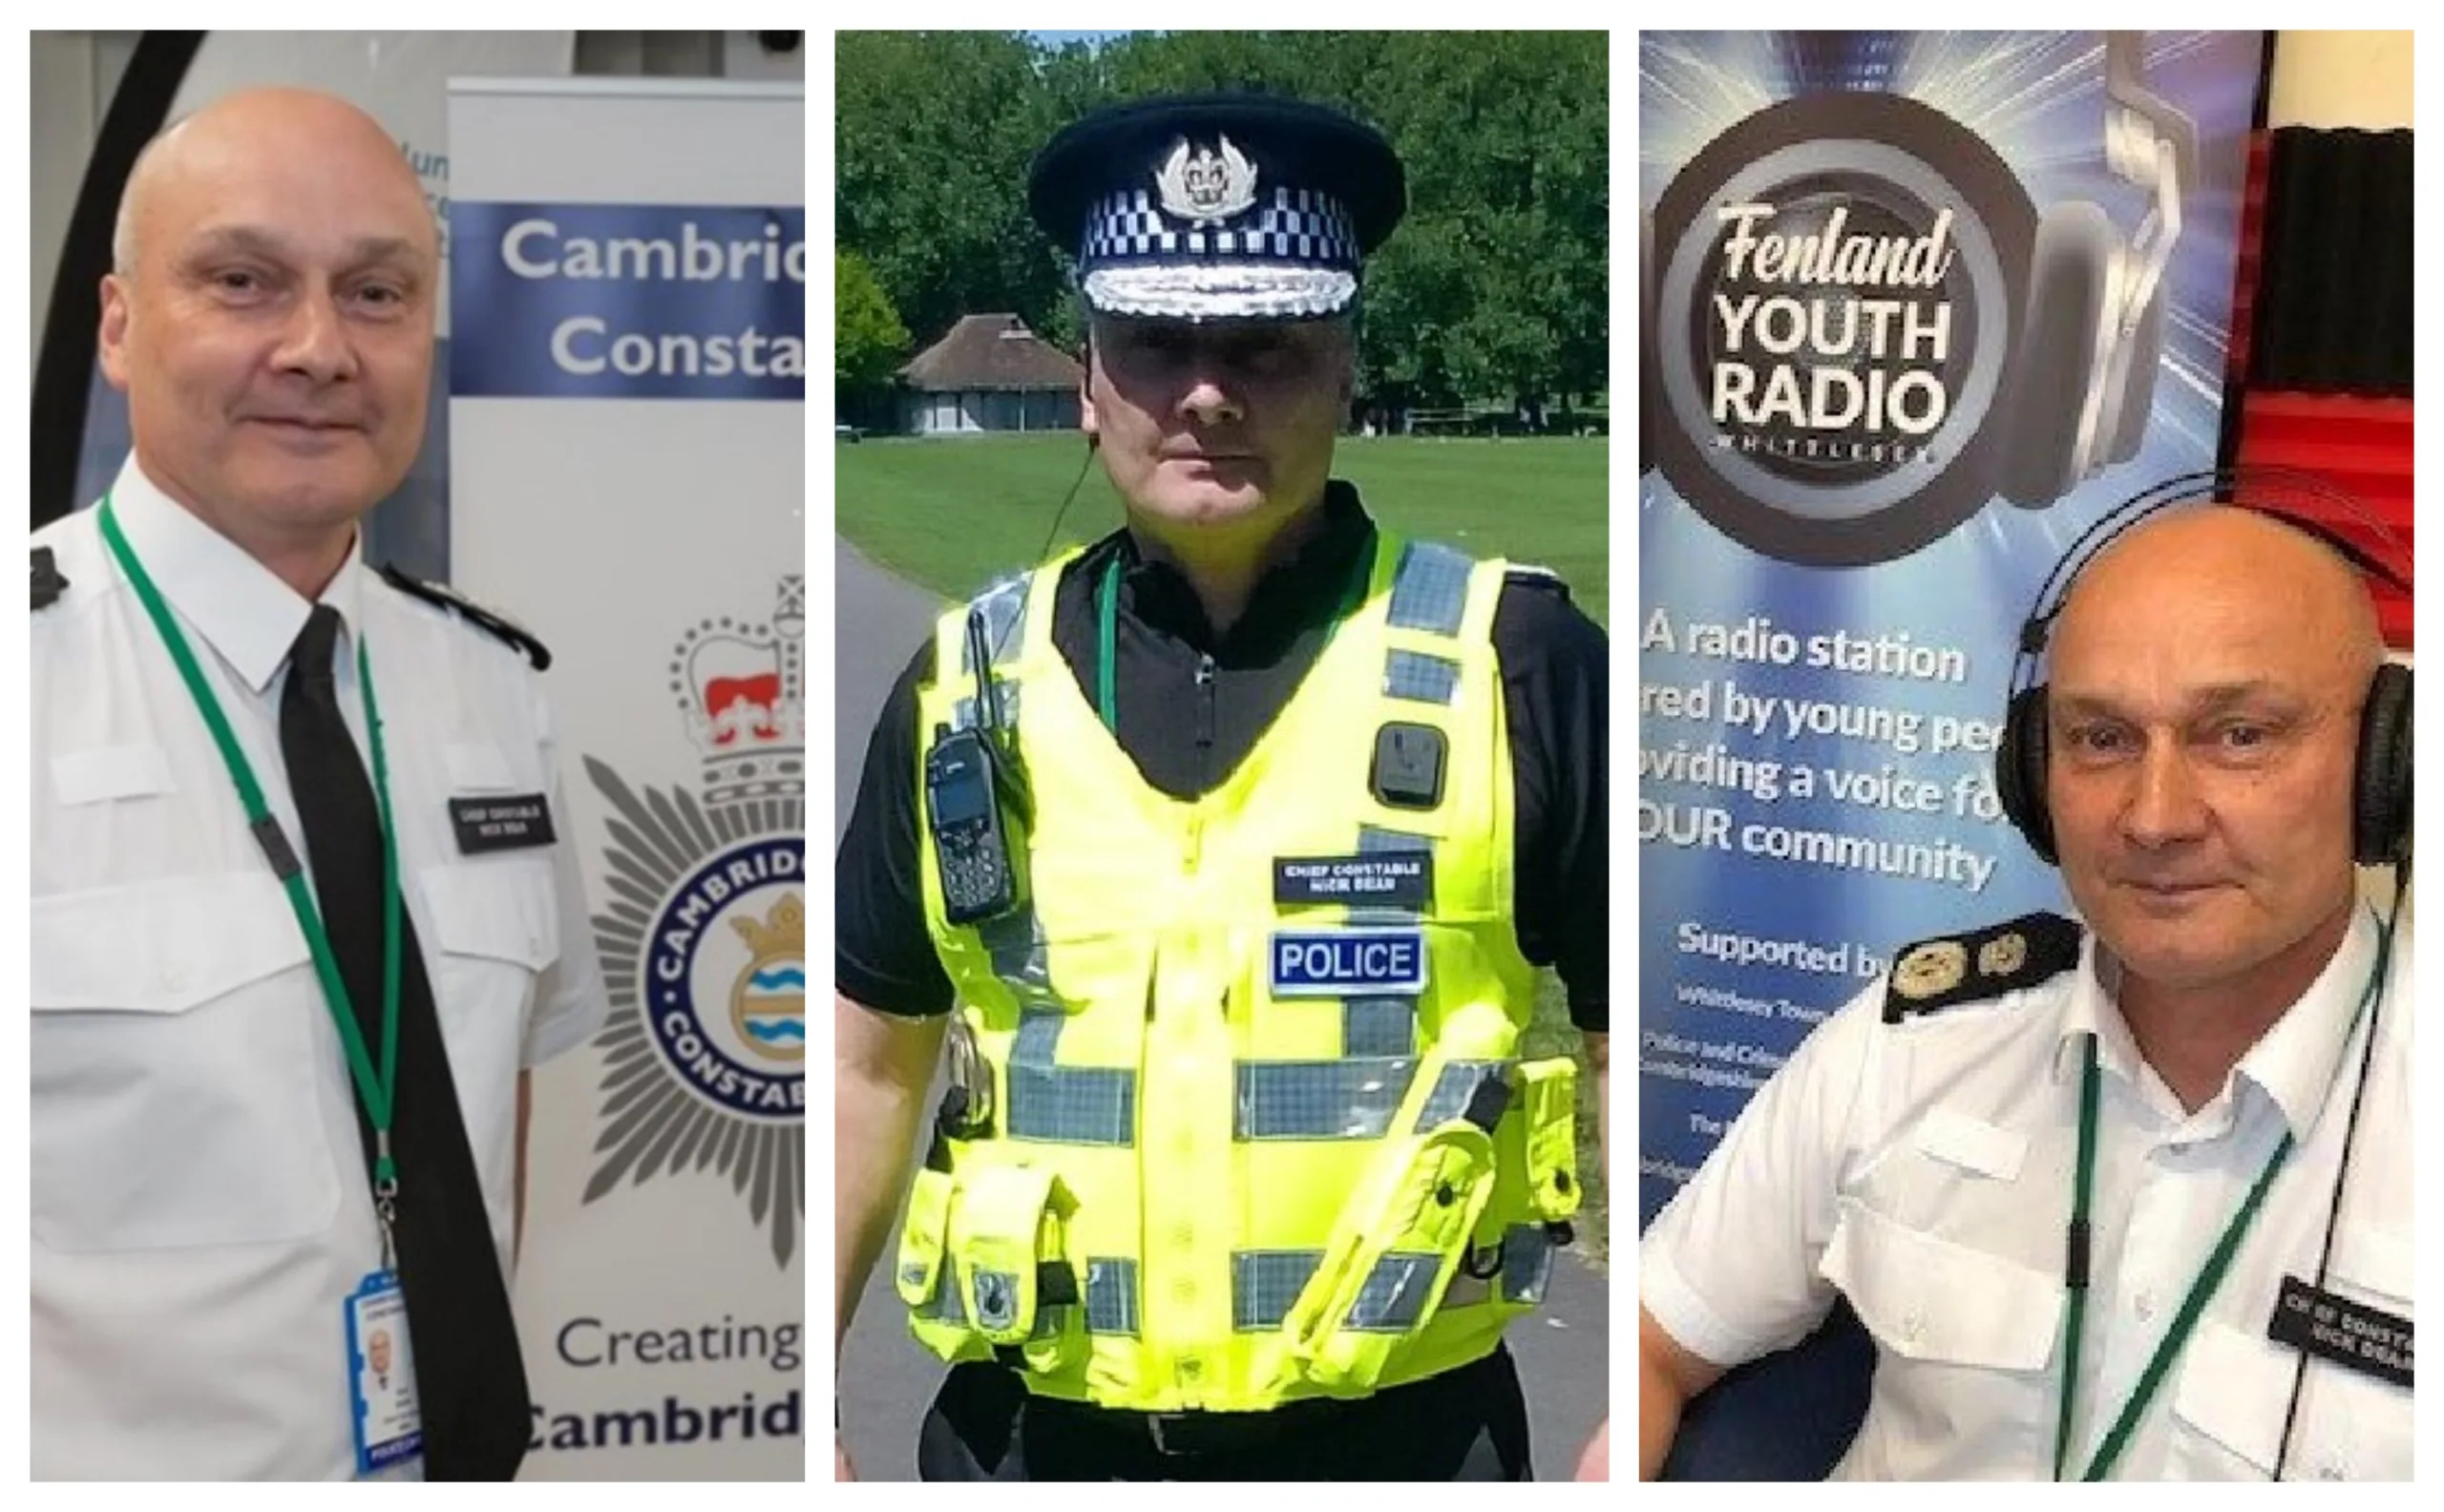 Mr Dean has served 31 years as a police officer, five of which have been in Cambridgeshire, where he became Chief Constable in September 2018.